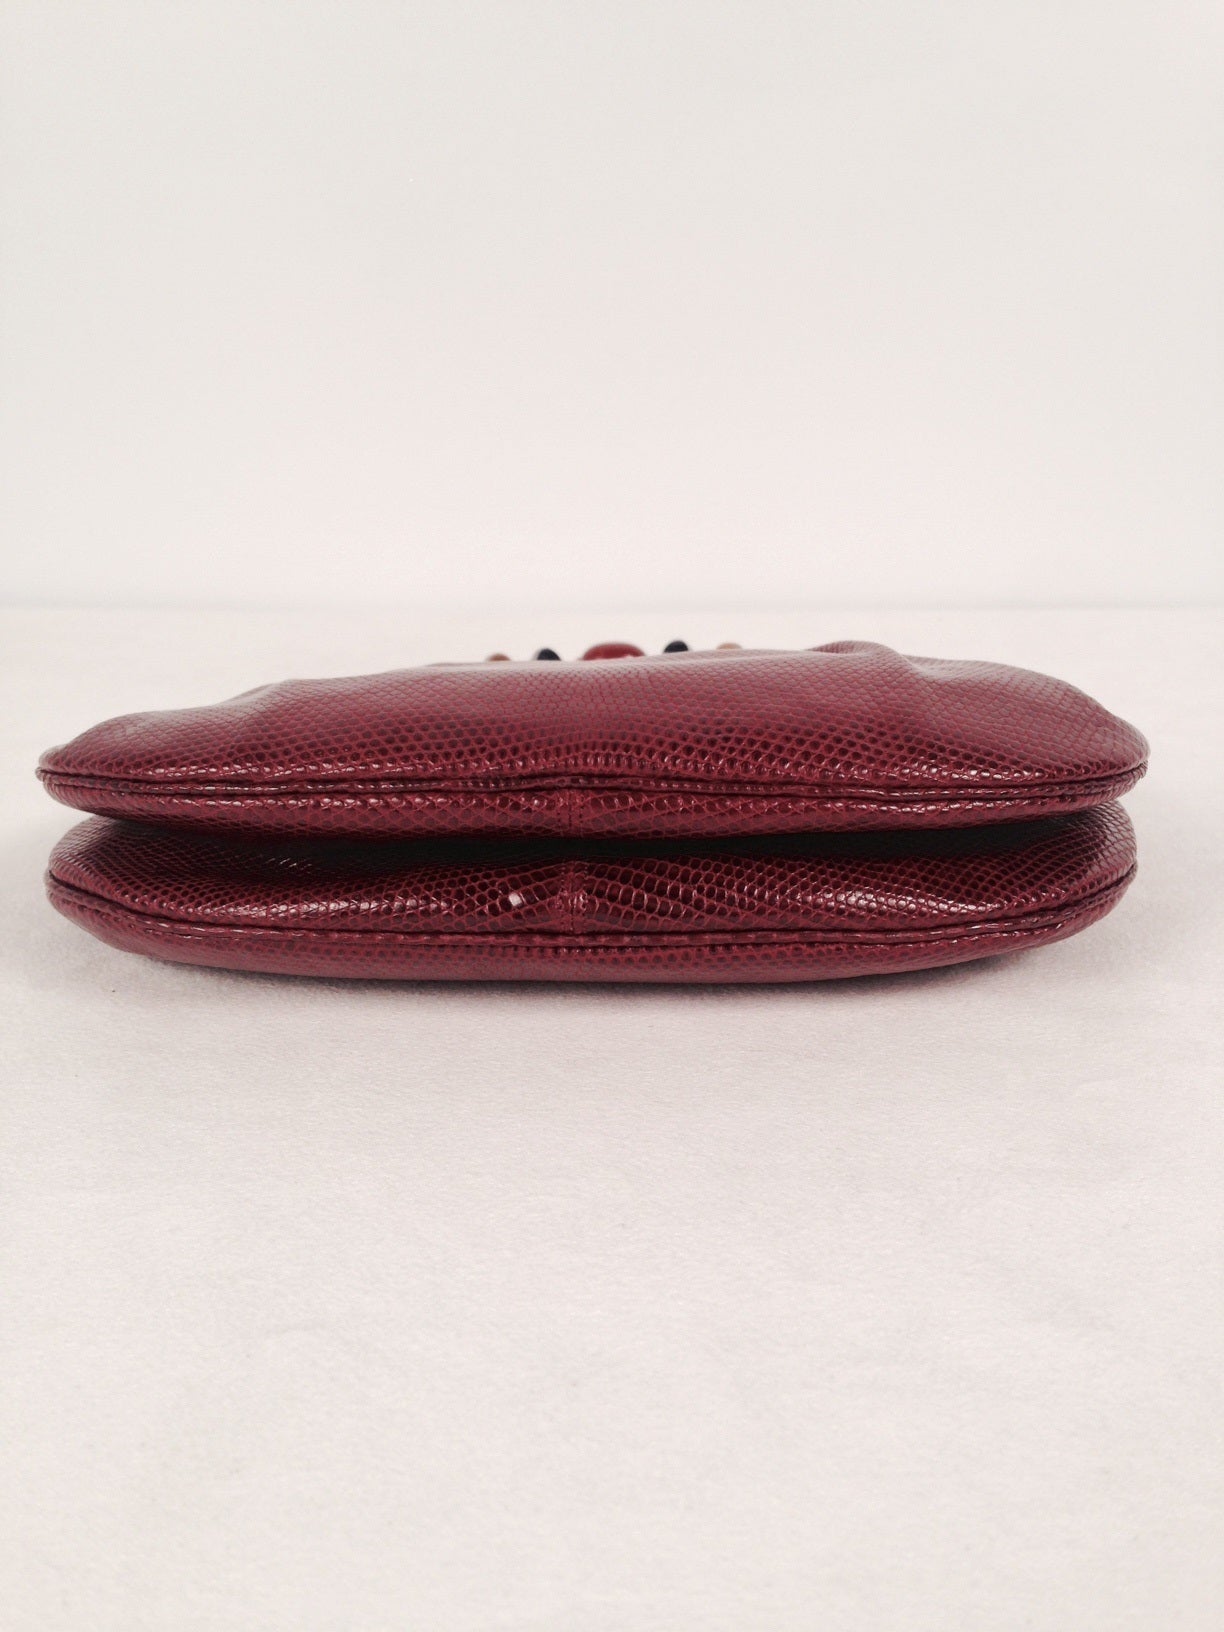 Vintage Judith Leiber Burgundy Lizard Evening Bag With Jeweled Clasp For Sale 3